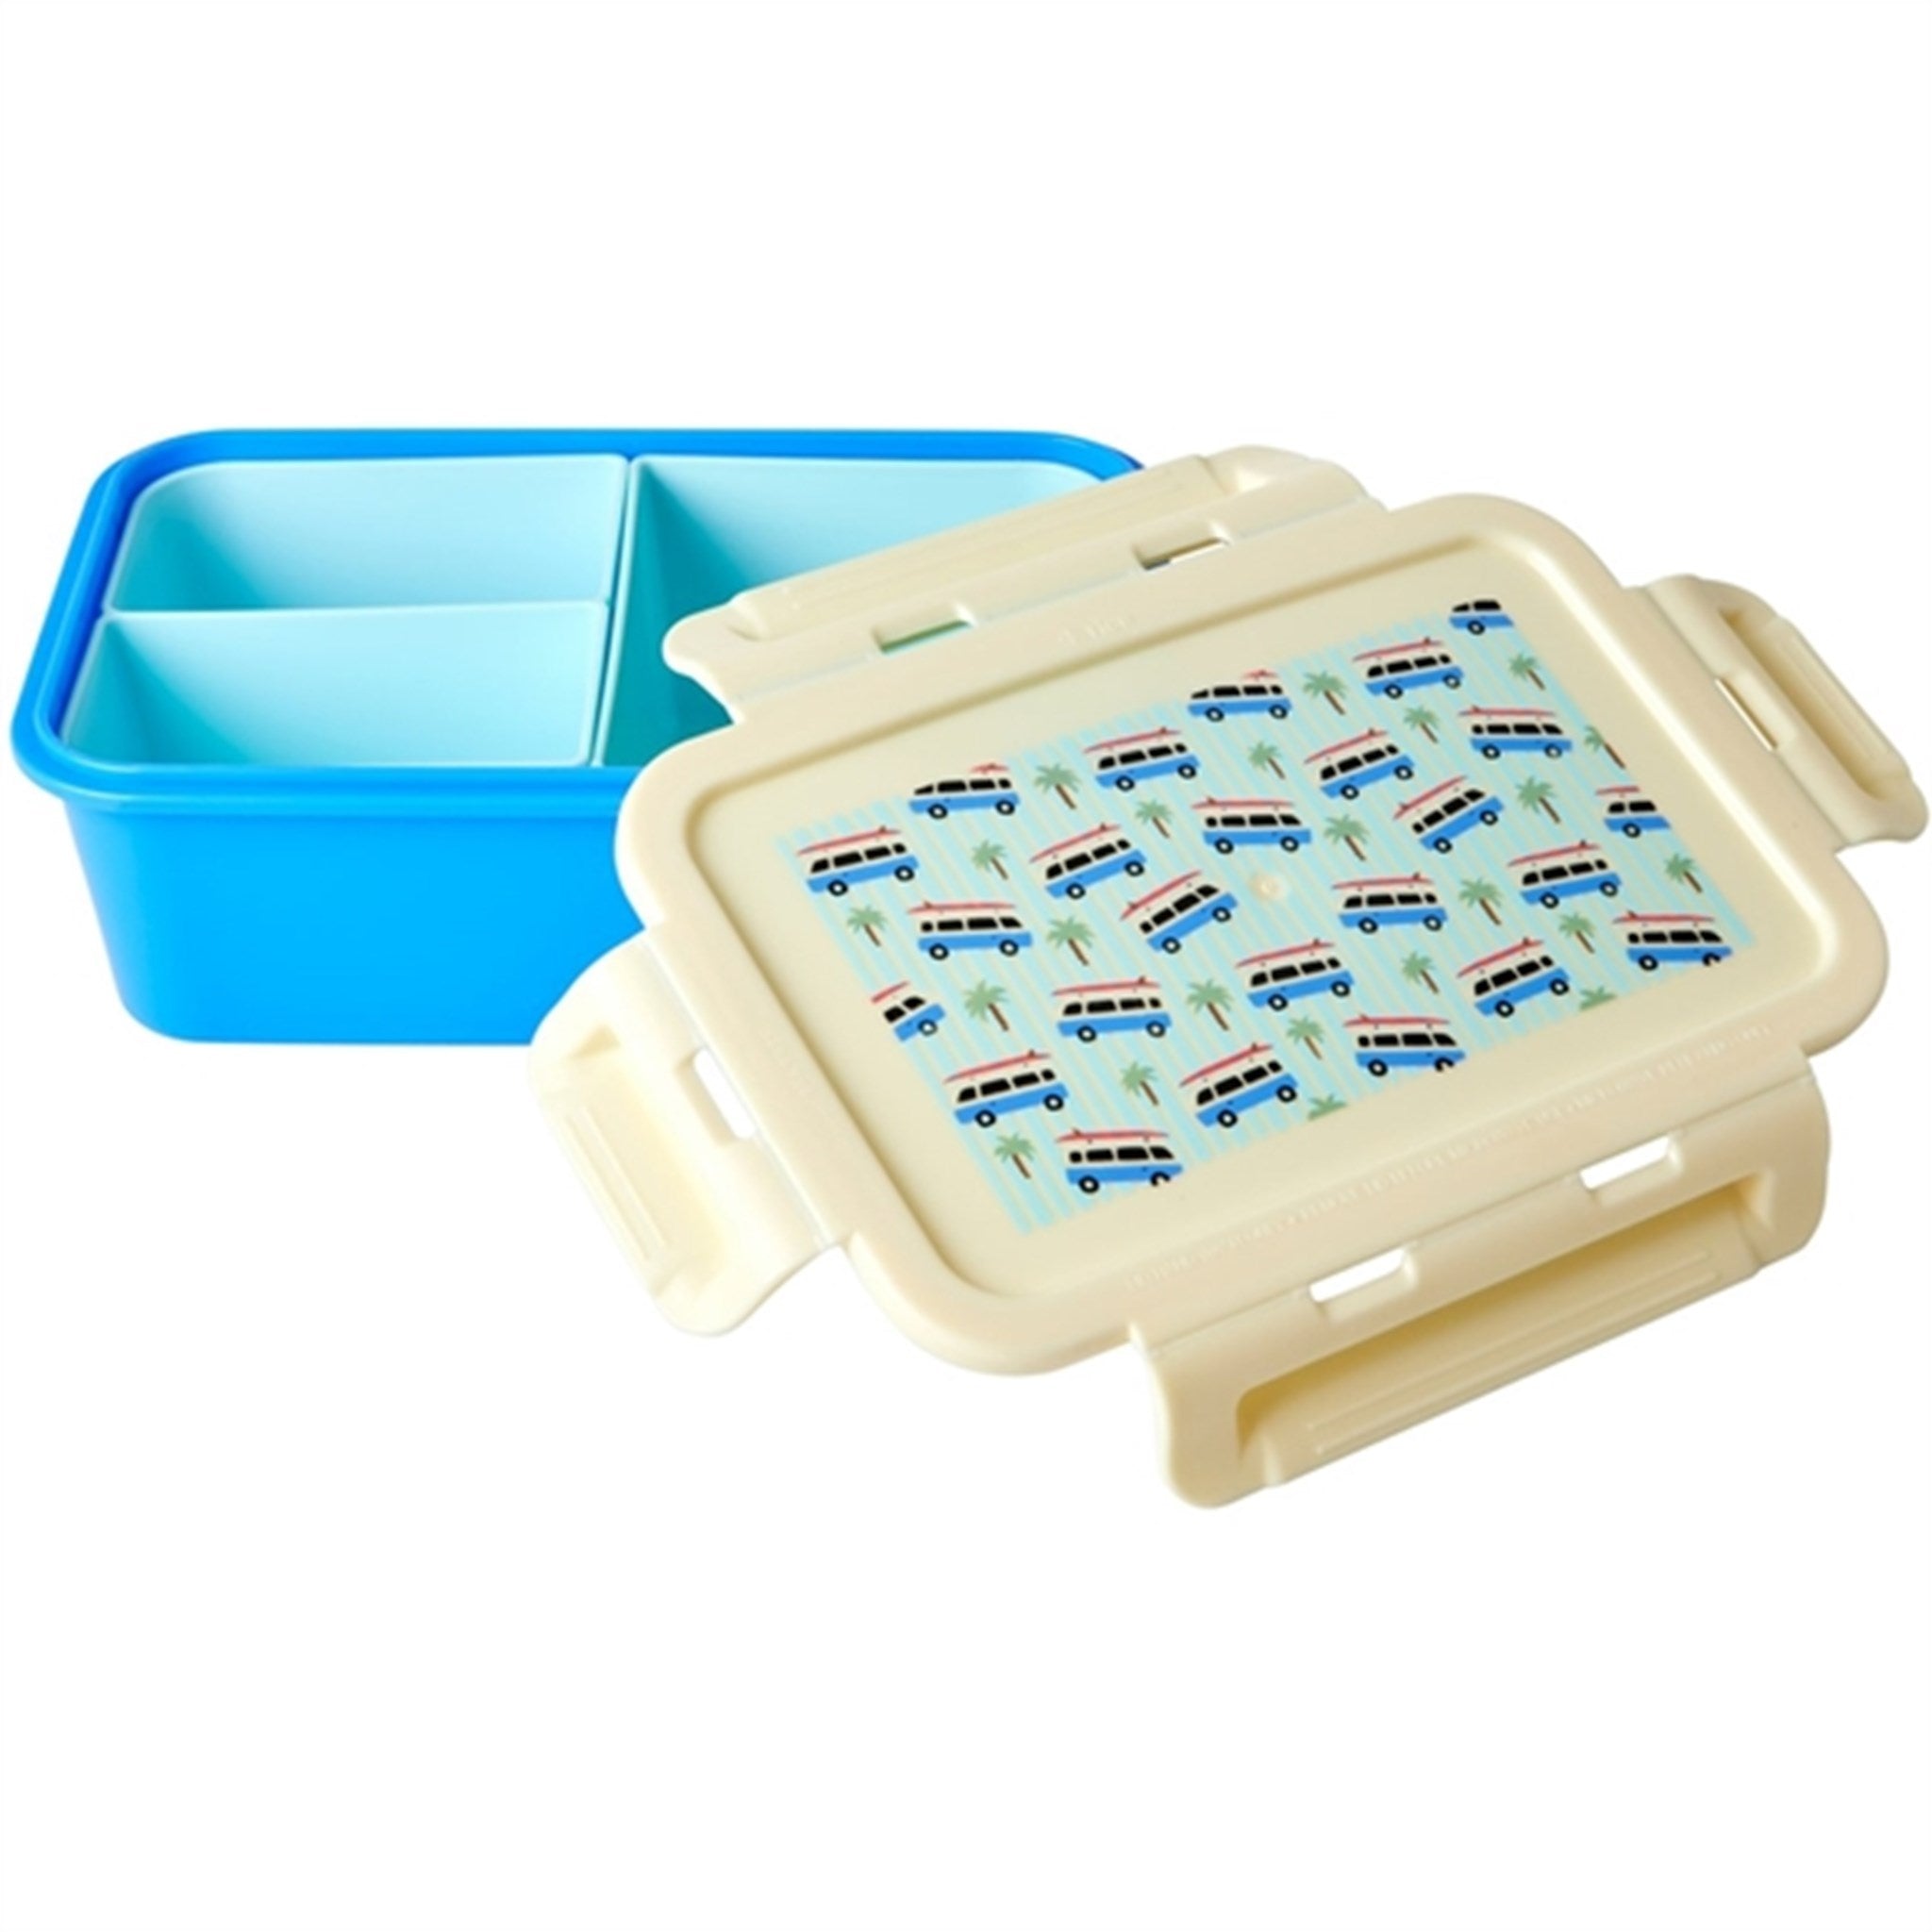 RICE Cars Lunch Box with 3 Rooms